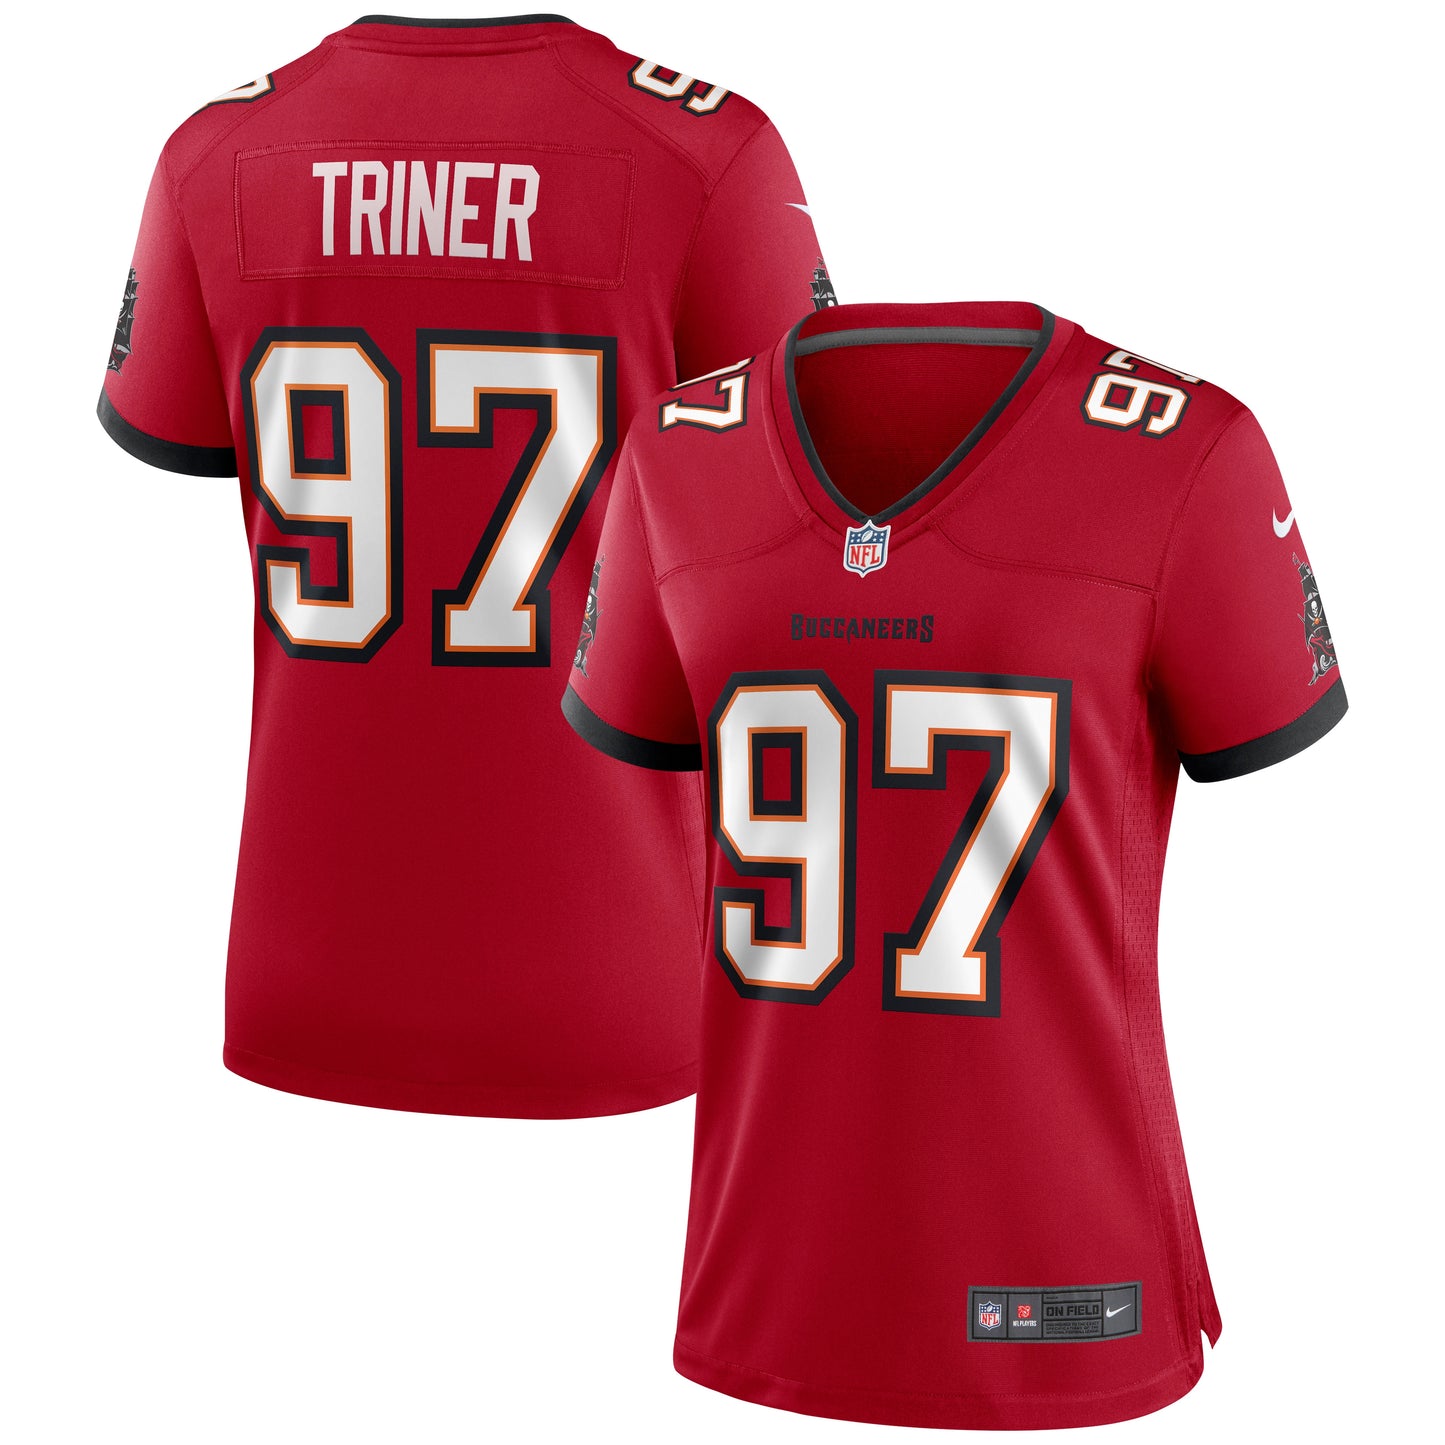 Zach Triner Tampa Bay Buccaneers Nike Women's Game Jersey - Red